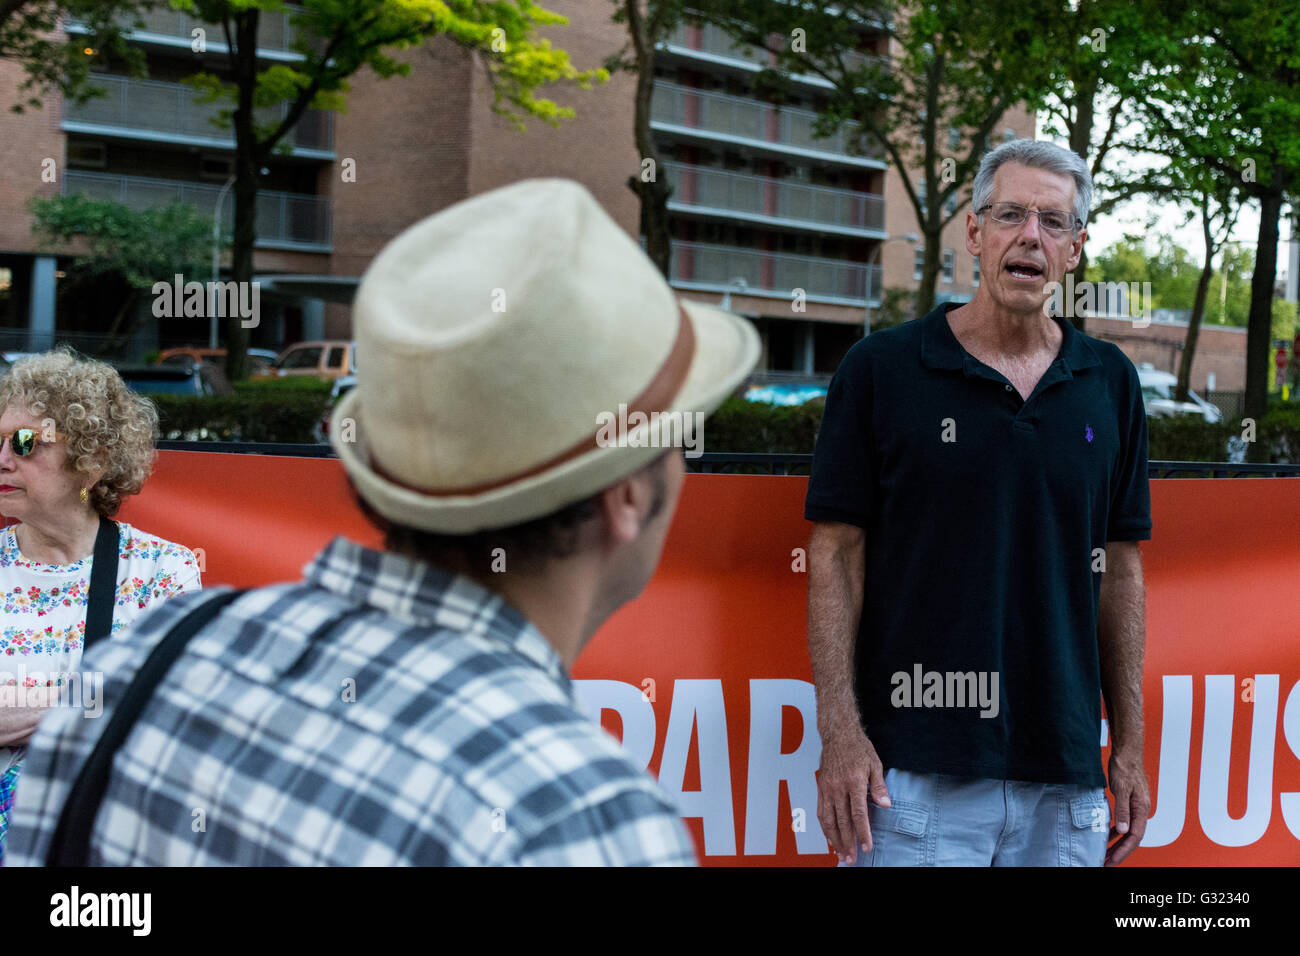 New York, USA. 6th June 2016. George Mallinckrodt, author of 'Getting Away with Murder' which details abuses and torture of mentally ill inmates, responds to a question at vigil. Prison rights advocates of the No Separate Justice campaign held a vigil at New York's Metropolitan Correctional Center charging human rights violations and abusive treatment of terror suspects held in such facilities. Credit:  M. Stan Reaves/Alamy Live News Stock Photo